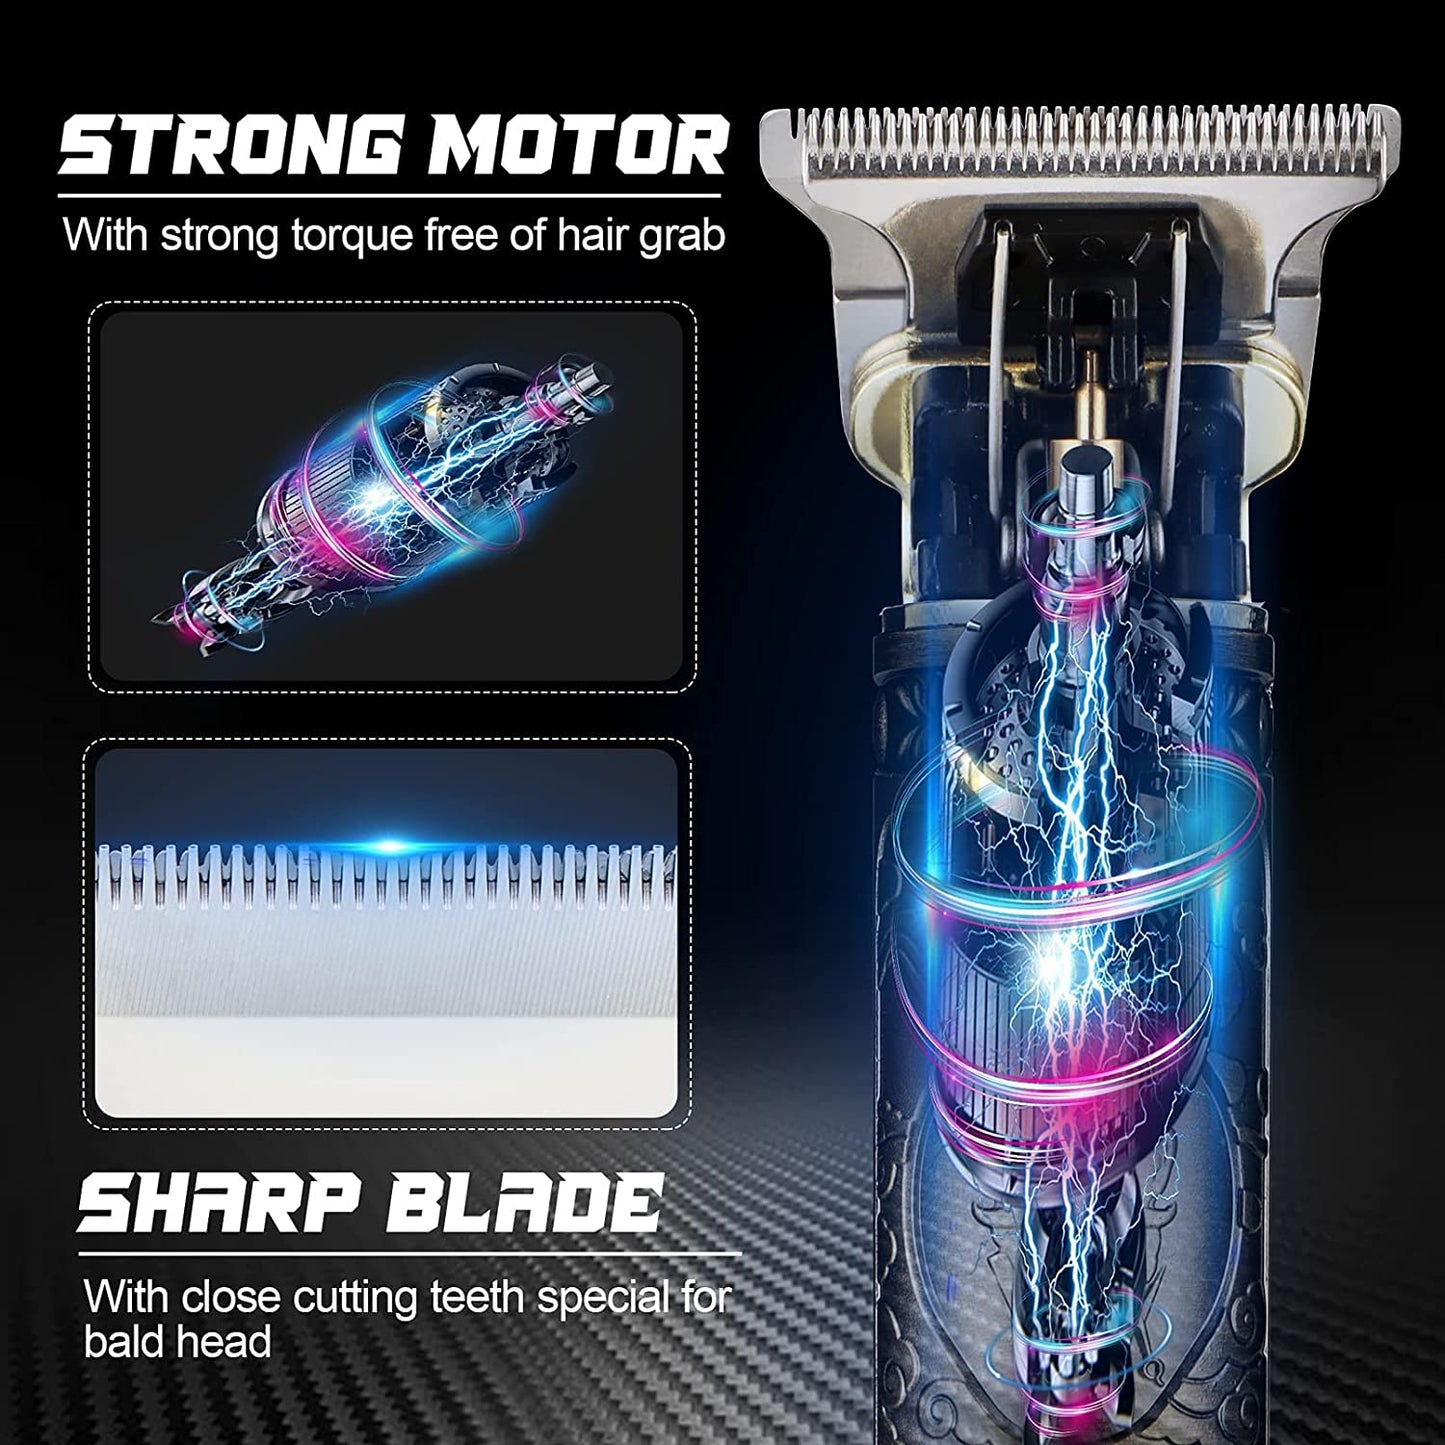 Professional Hair/Beard Clipper (14 pcs) with LED Display